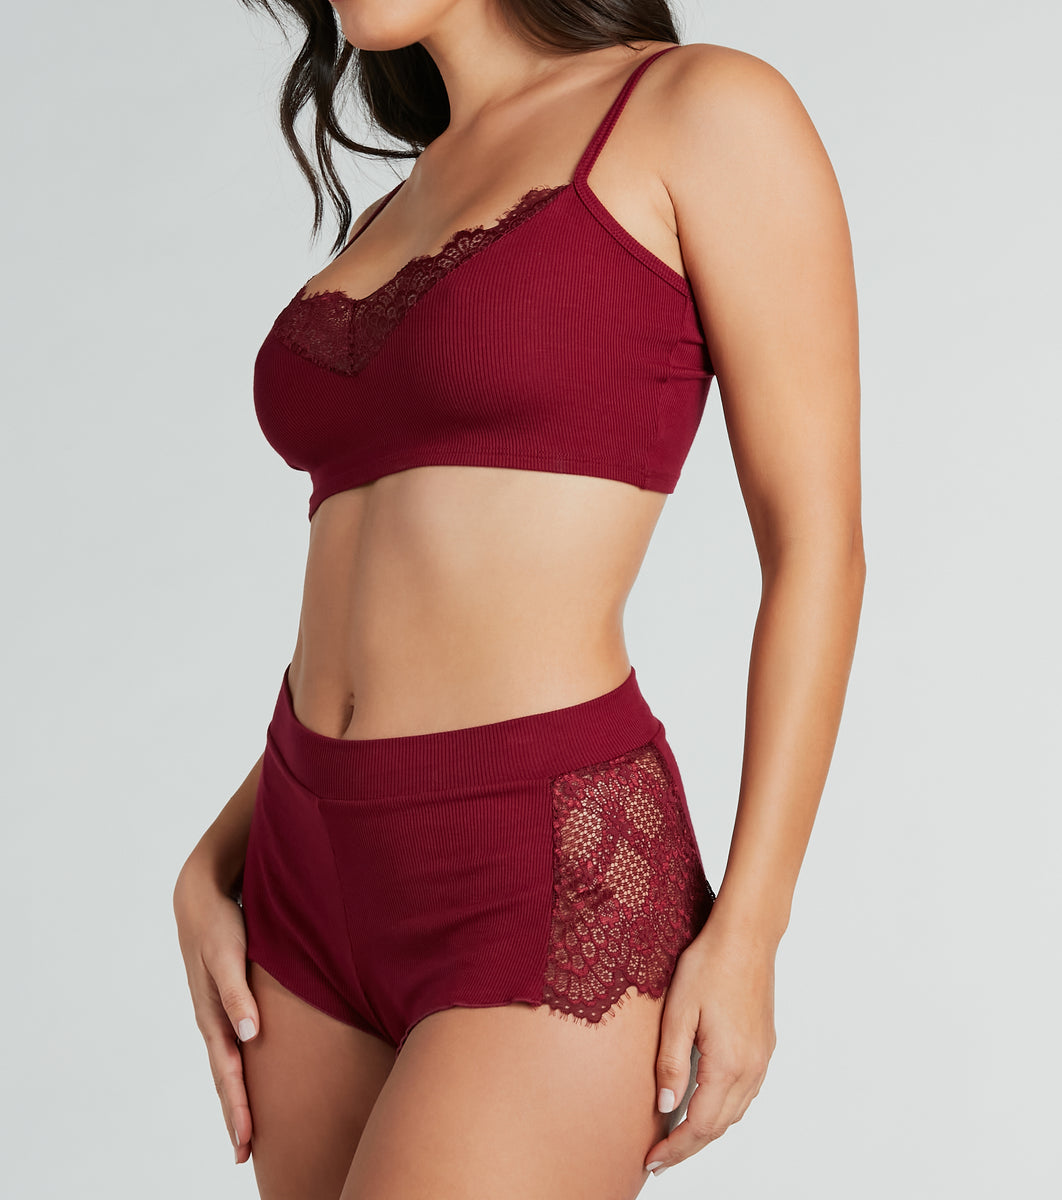 ICollection Plus 2 Piece Bralette and Panty Lingerie Set